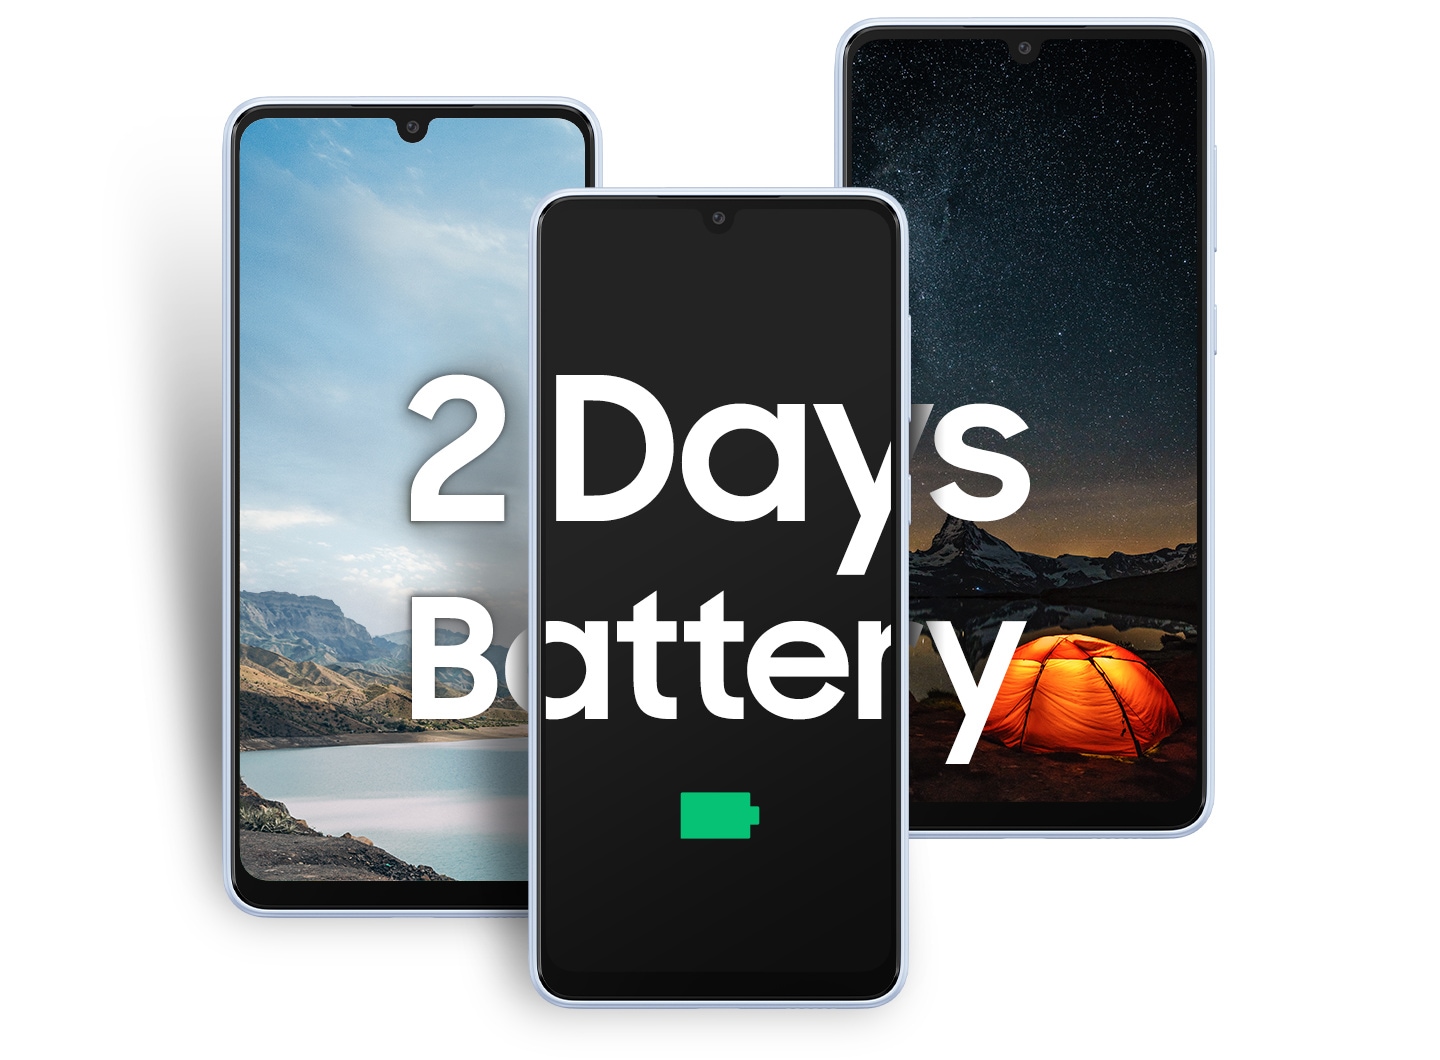 n africa feature awesome battery lasts two days 531331242?$FB TYPE A JPG$